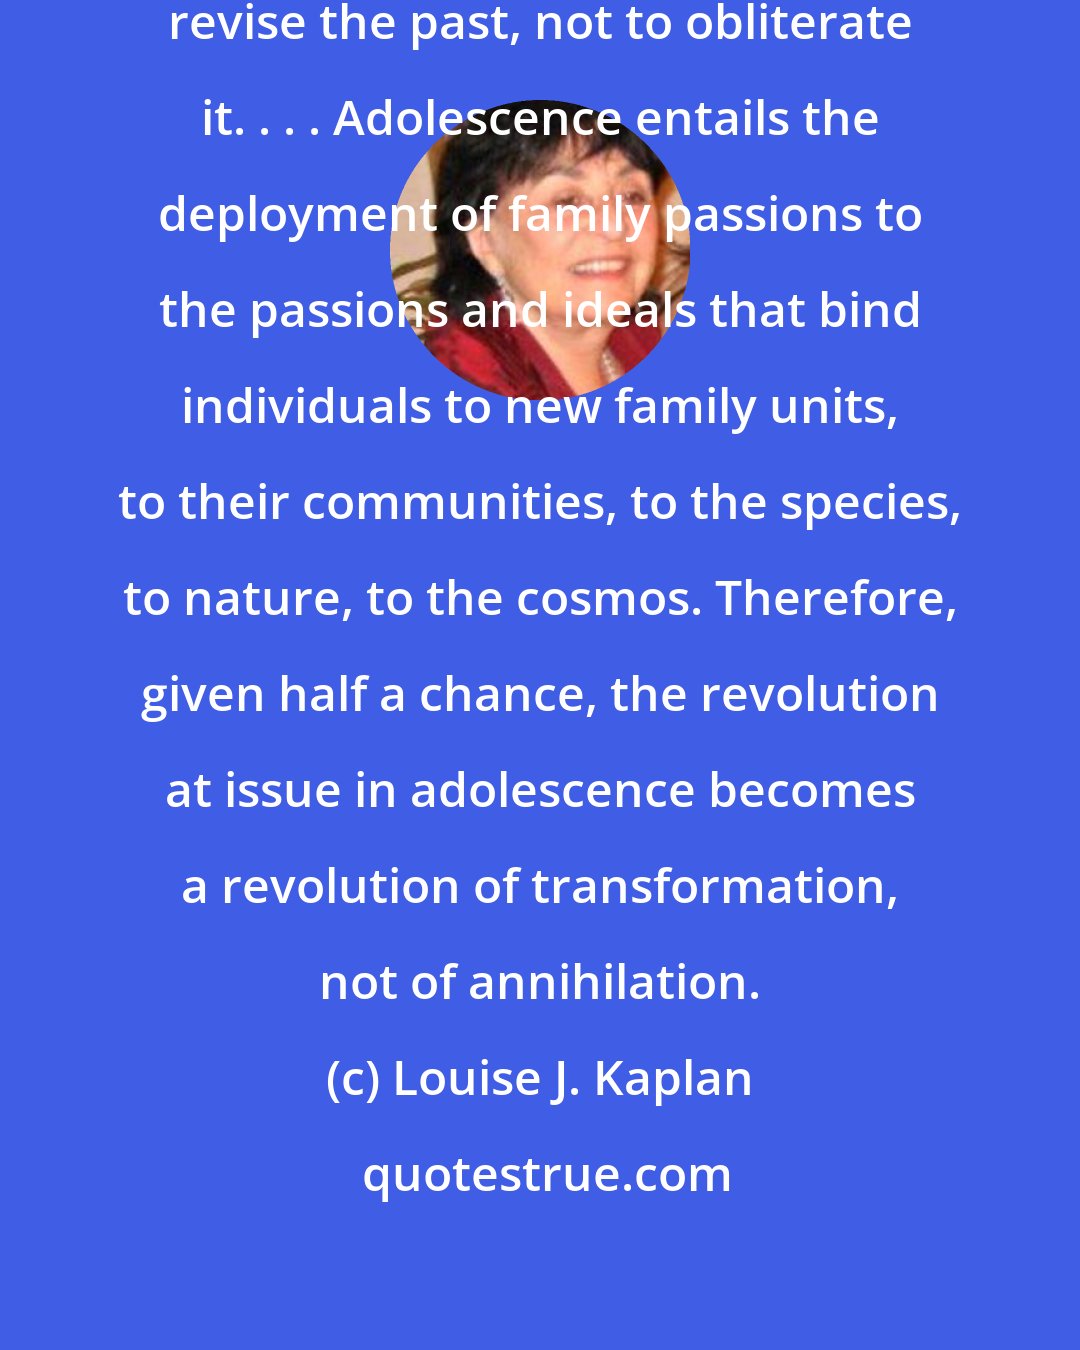 Louise J. Kaplan: The purpose of adolescence is to revise the past, not to obliterate it. . . . Adolescence entails the deployment of family passions to the passions and ideals that bind individuals to new family units, to their communities, to the species, to nature, to the cosmos. Therefore, given half a chance, the revolution at issue in adolescence becomes a revolution of transformation, not of annihilation.